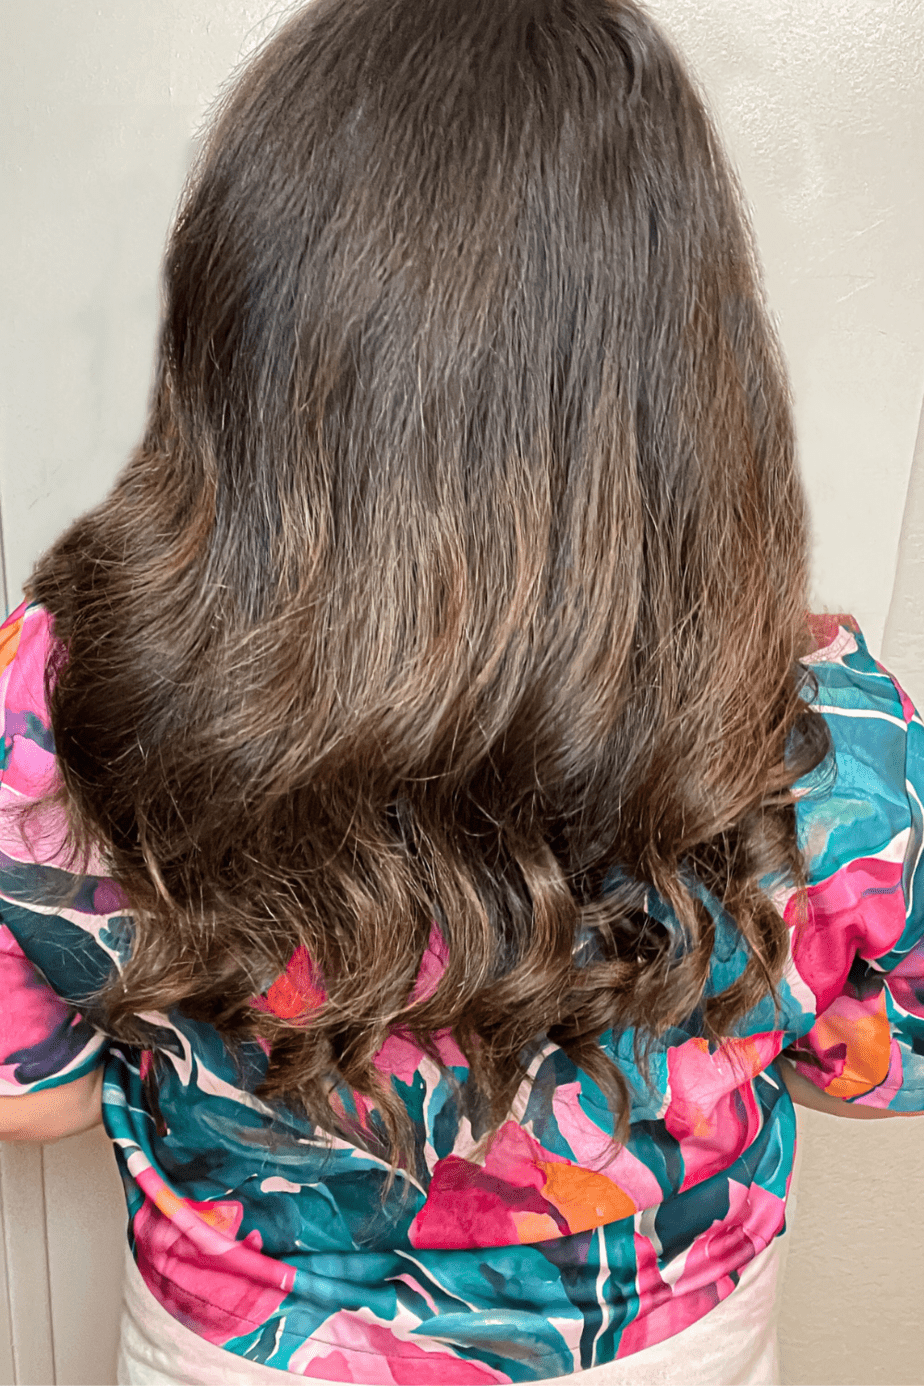 How To Create The Best Loose Curls on Long Thick Hair